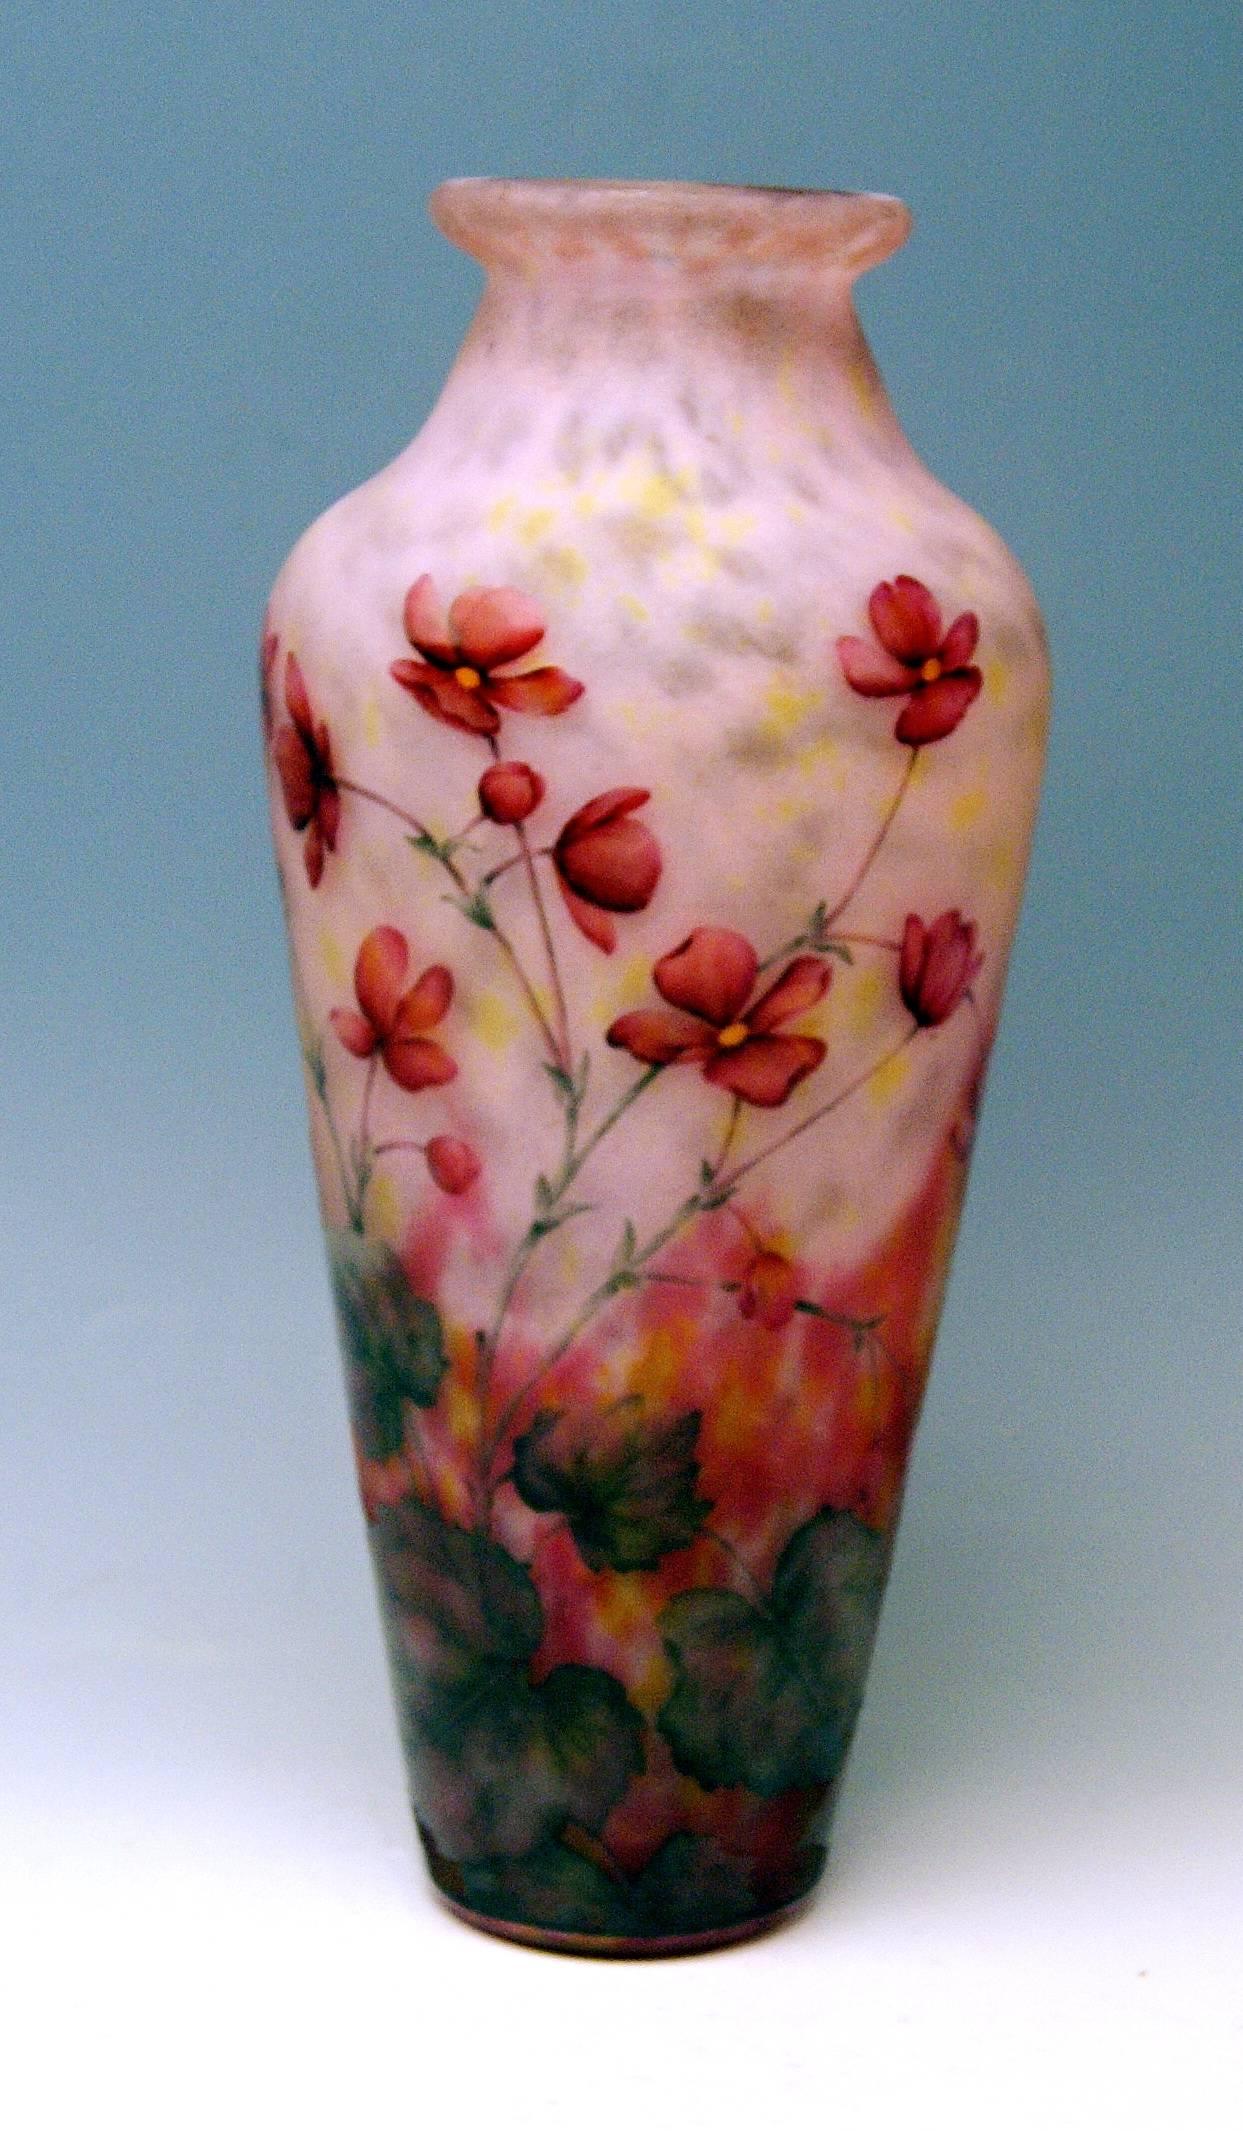 Daum Nancy rare tall vase: It is of so-said 'shouldered form and tapering type'.

Manufactory: 
Daum frères / made in France / Nancy, Lorraine, circa 1910-1915. 

Designer: Daum frères (Auguste and Antonin Daum)

Technique of manufacture: Cameo